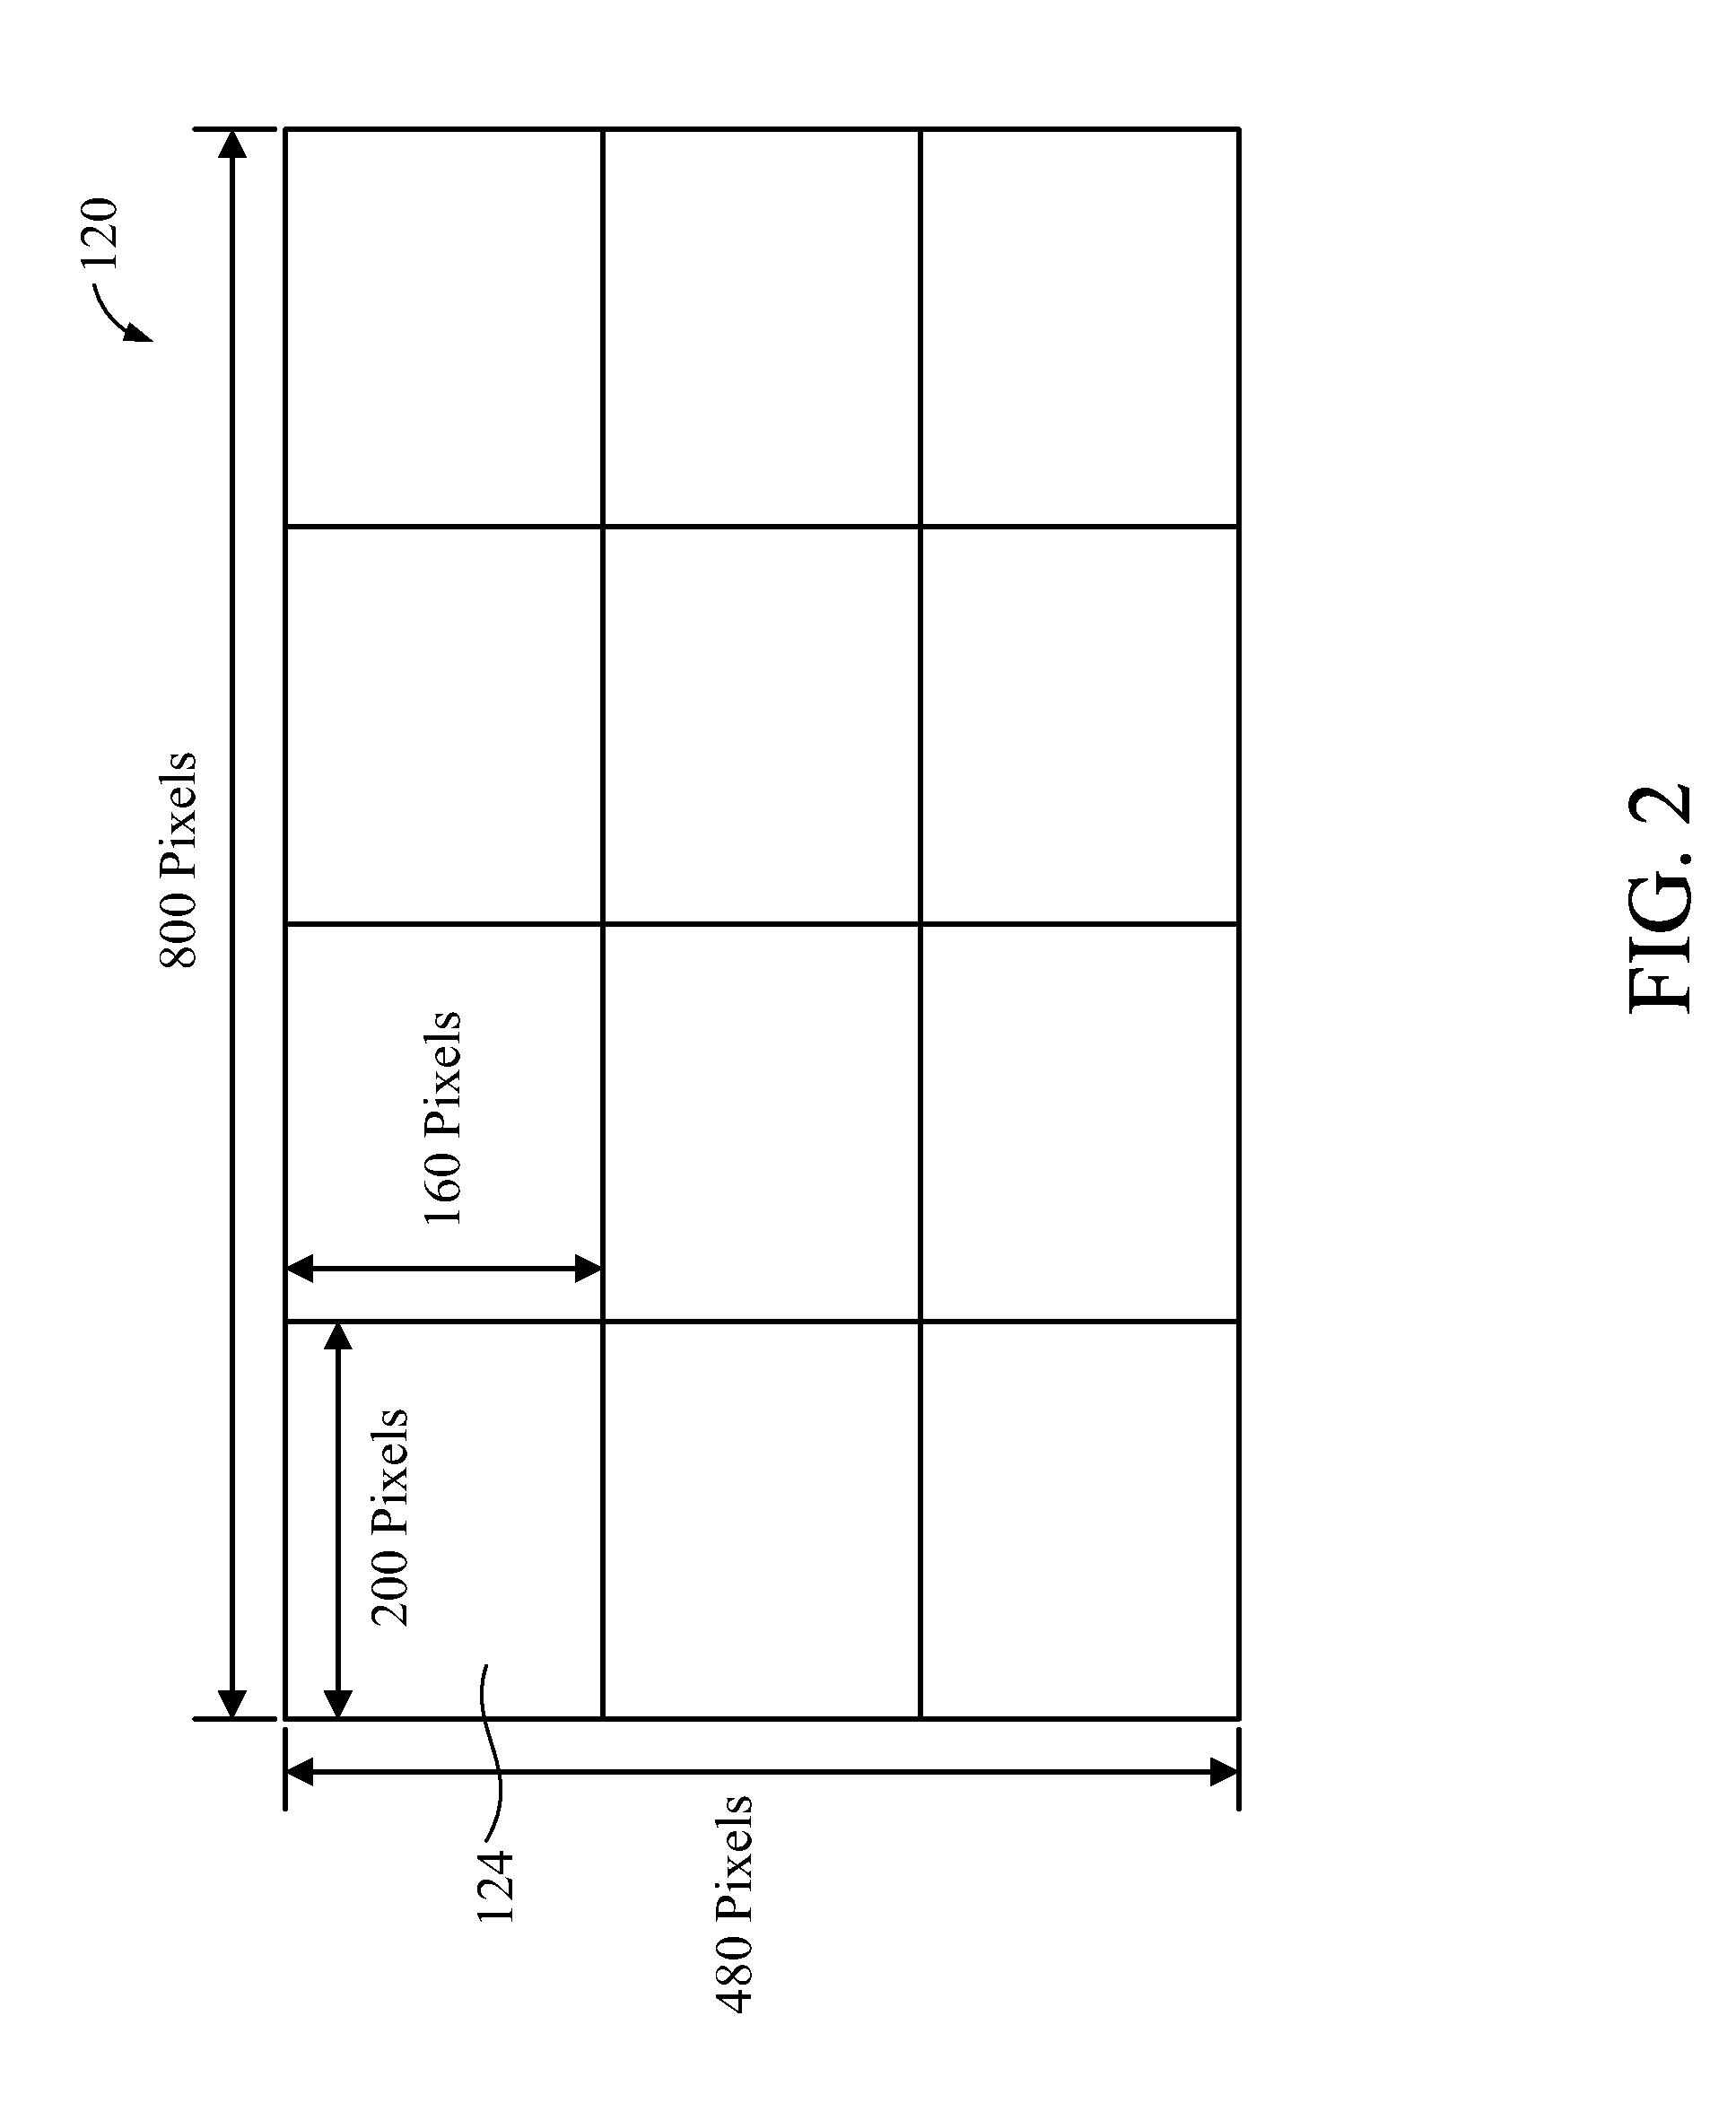 Adaptive frame rate modulation system and method thereof